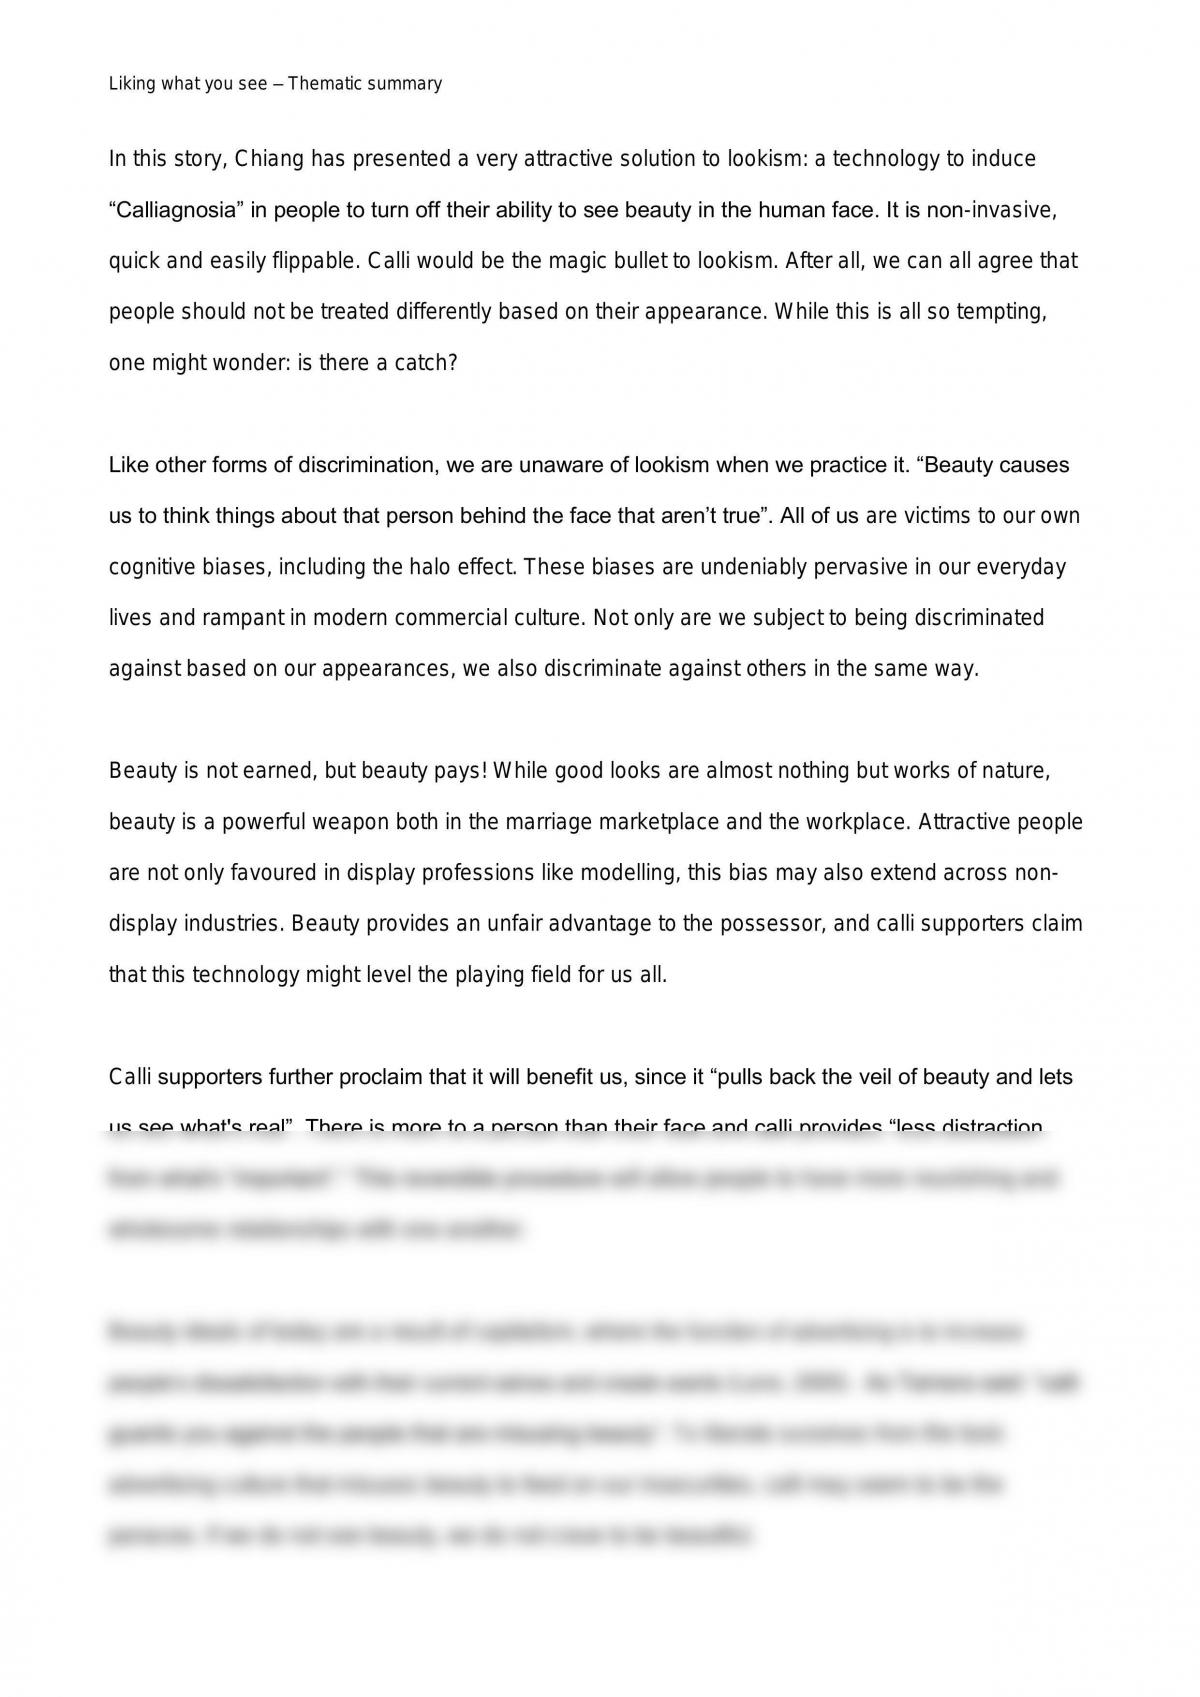 Liking what you see thematic summary - Page 1